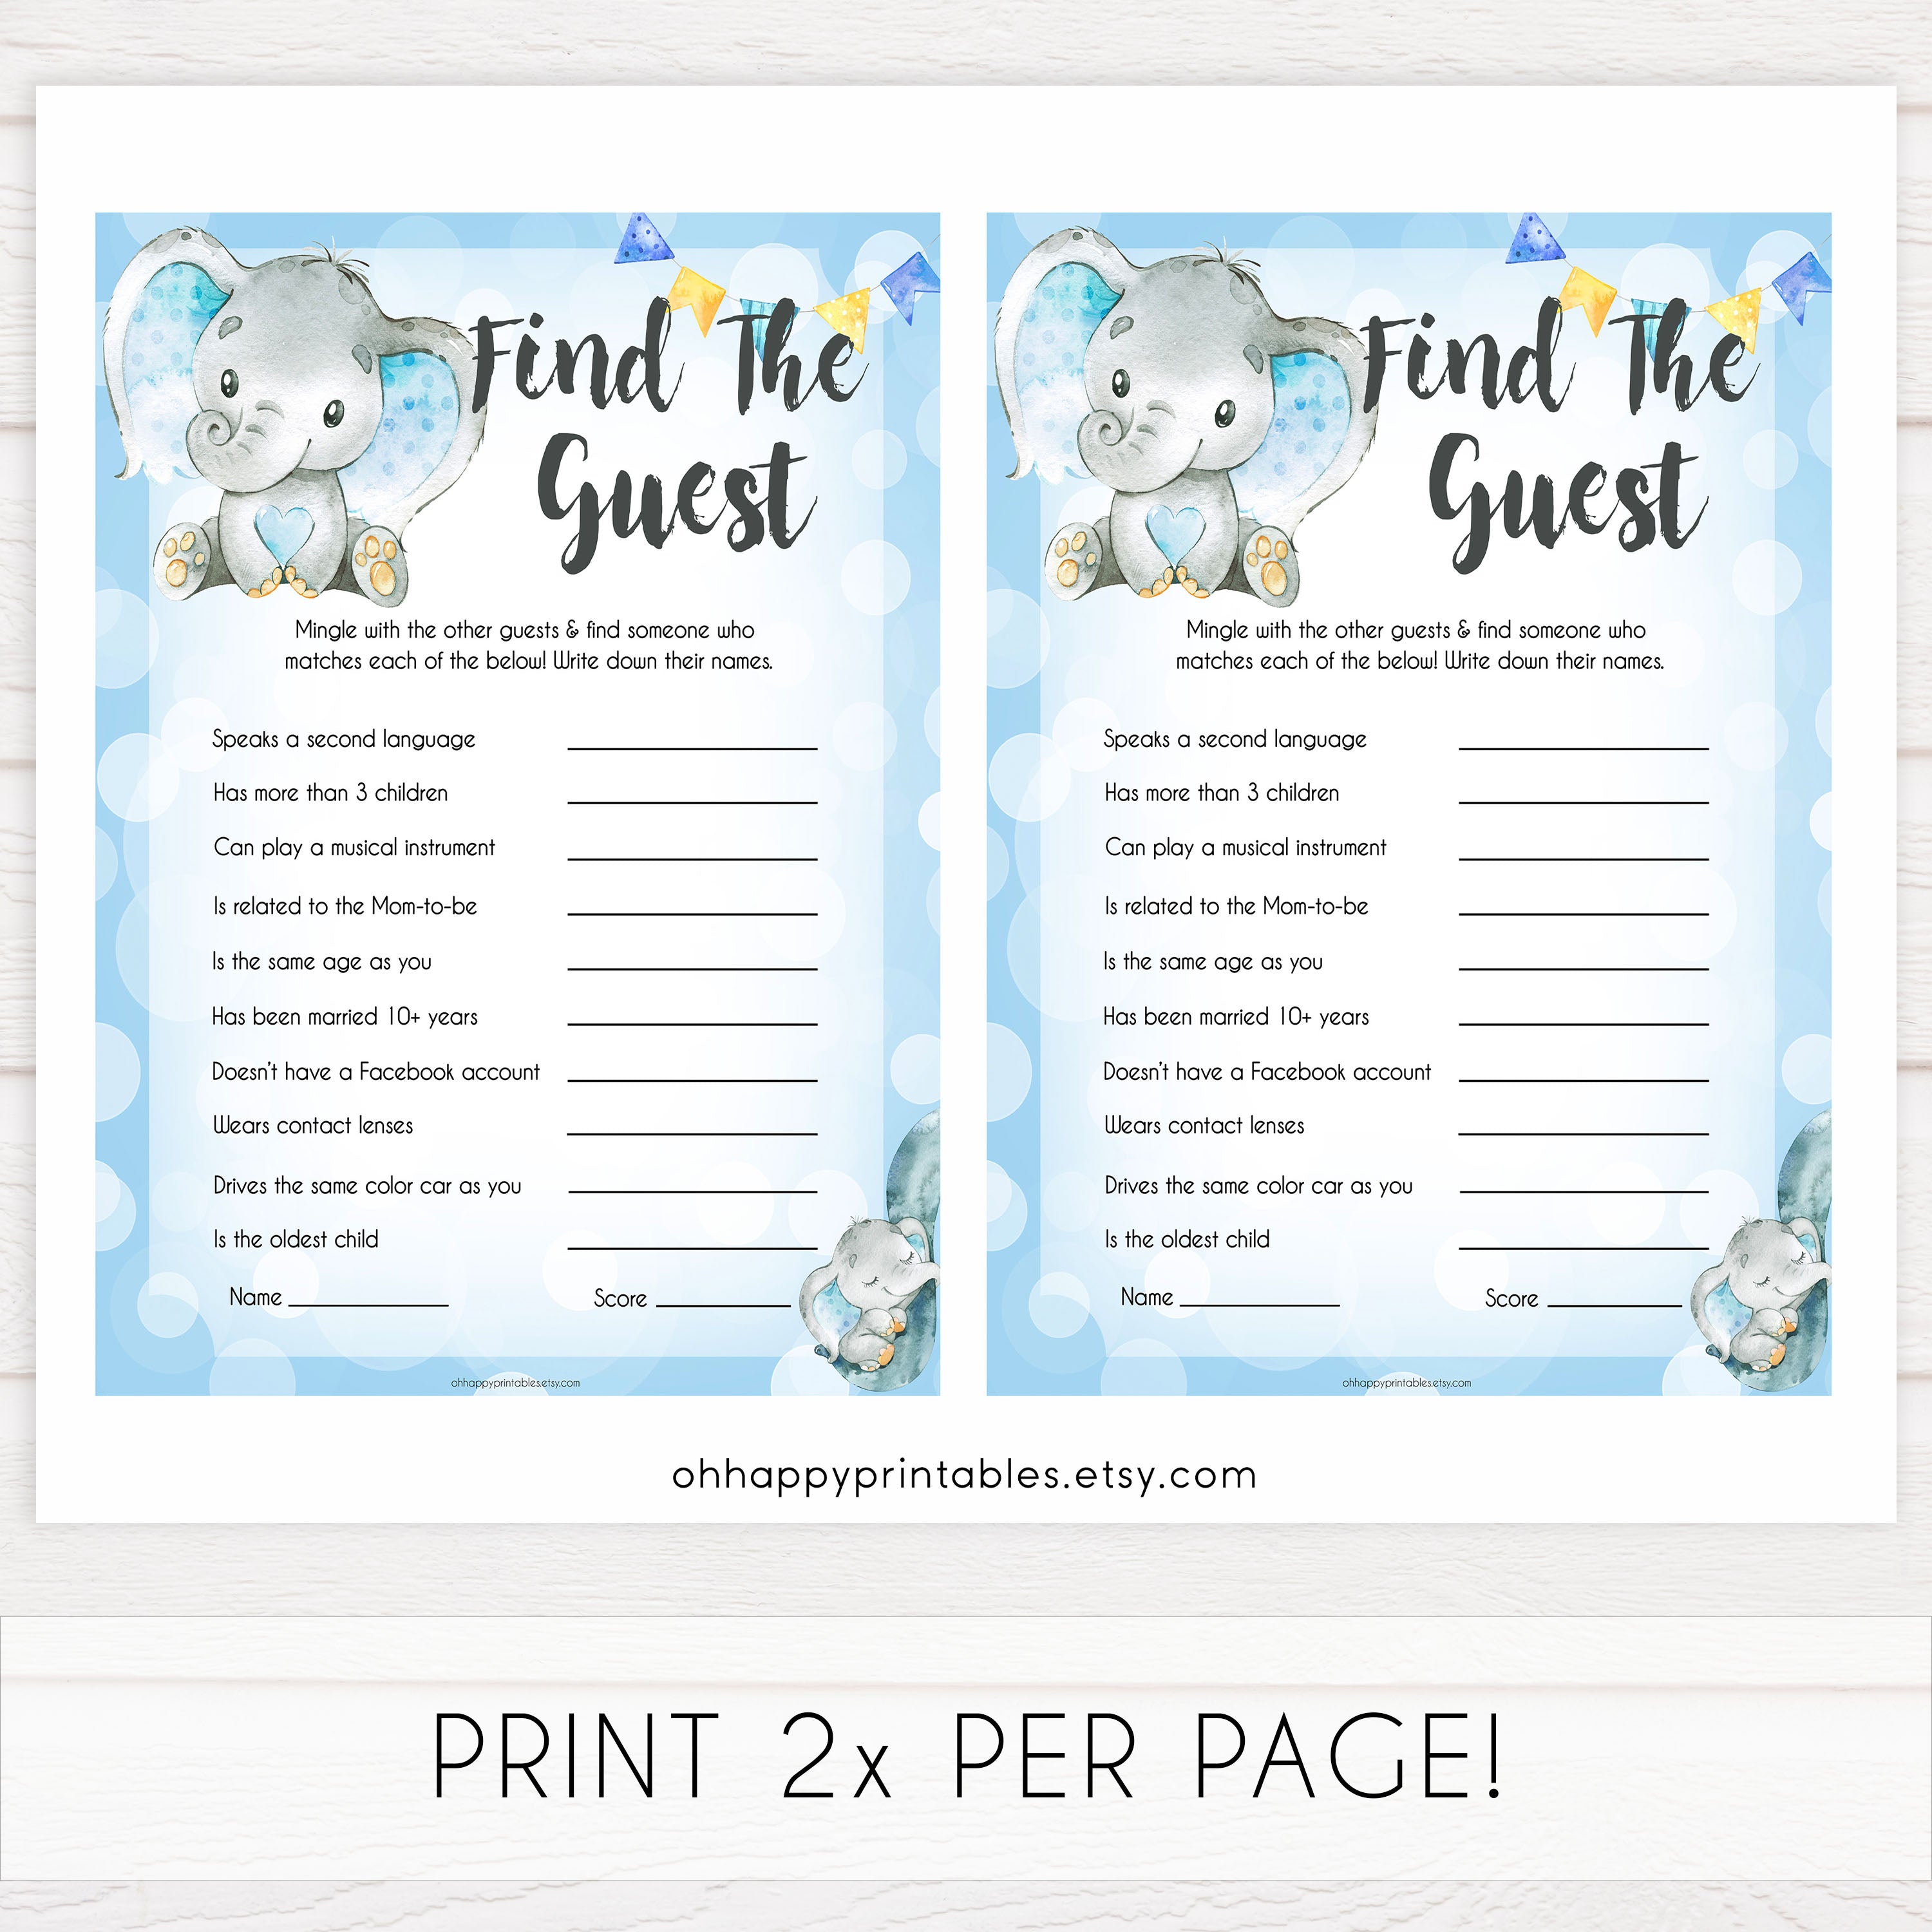 Blue elephant baby games, find the guest, elephant baby games, printable baby games, top baby games, best baby shower games, baby shower ideas, fun baby games, elephant baby shower